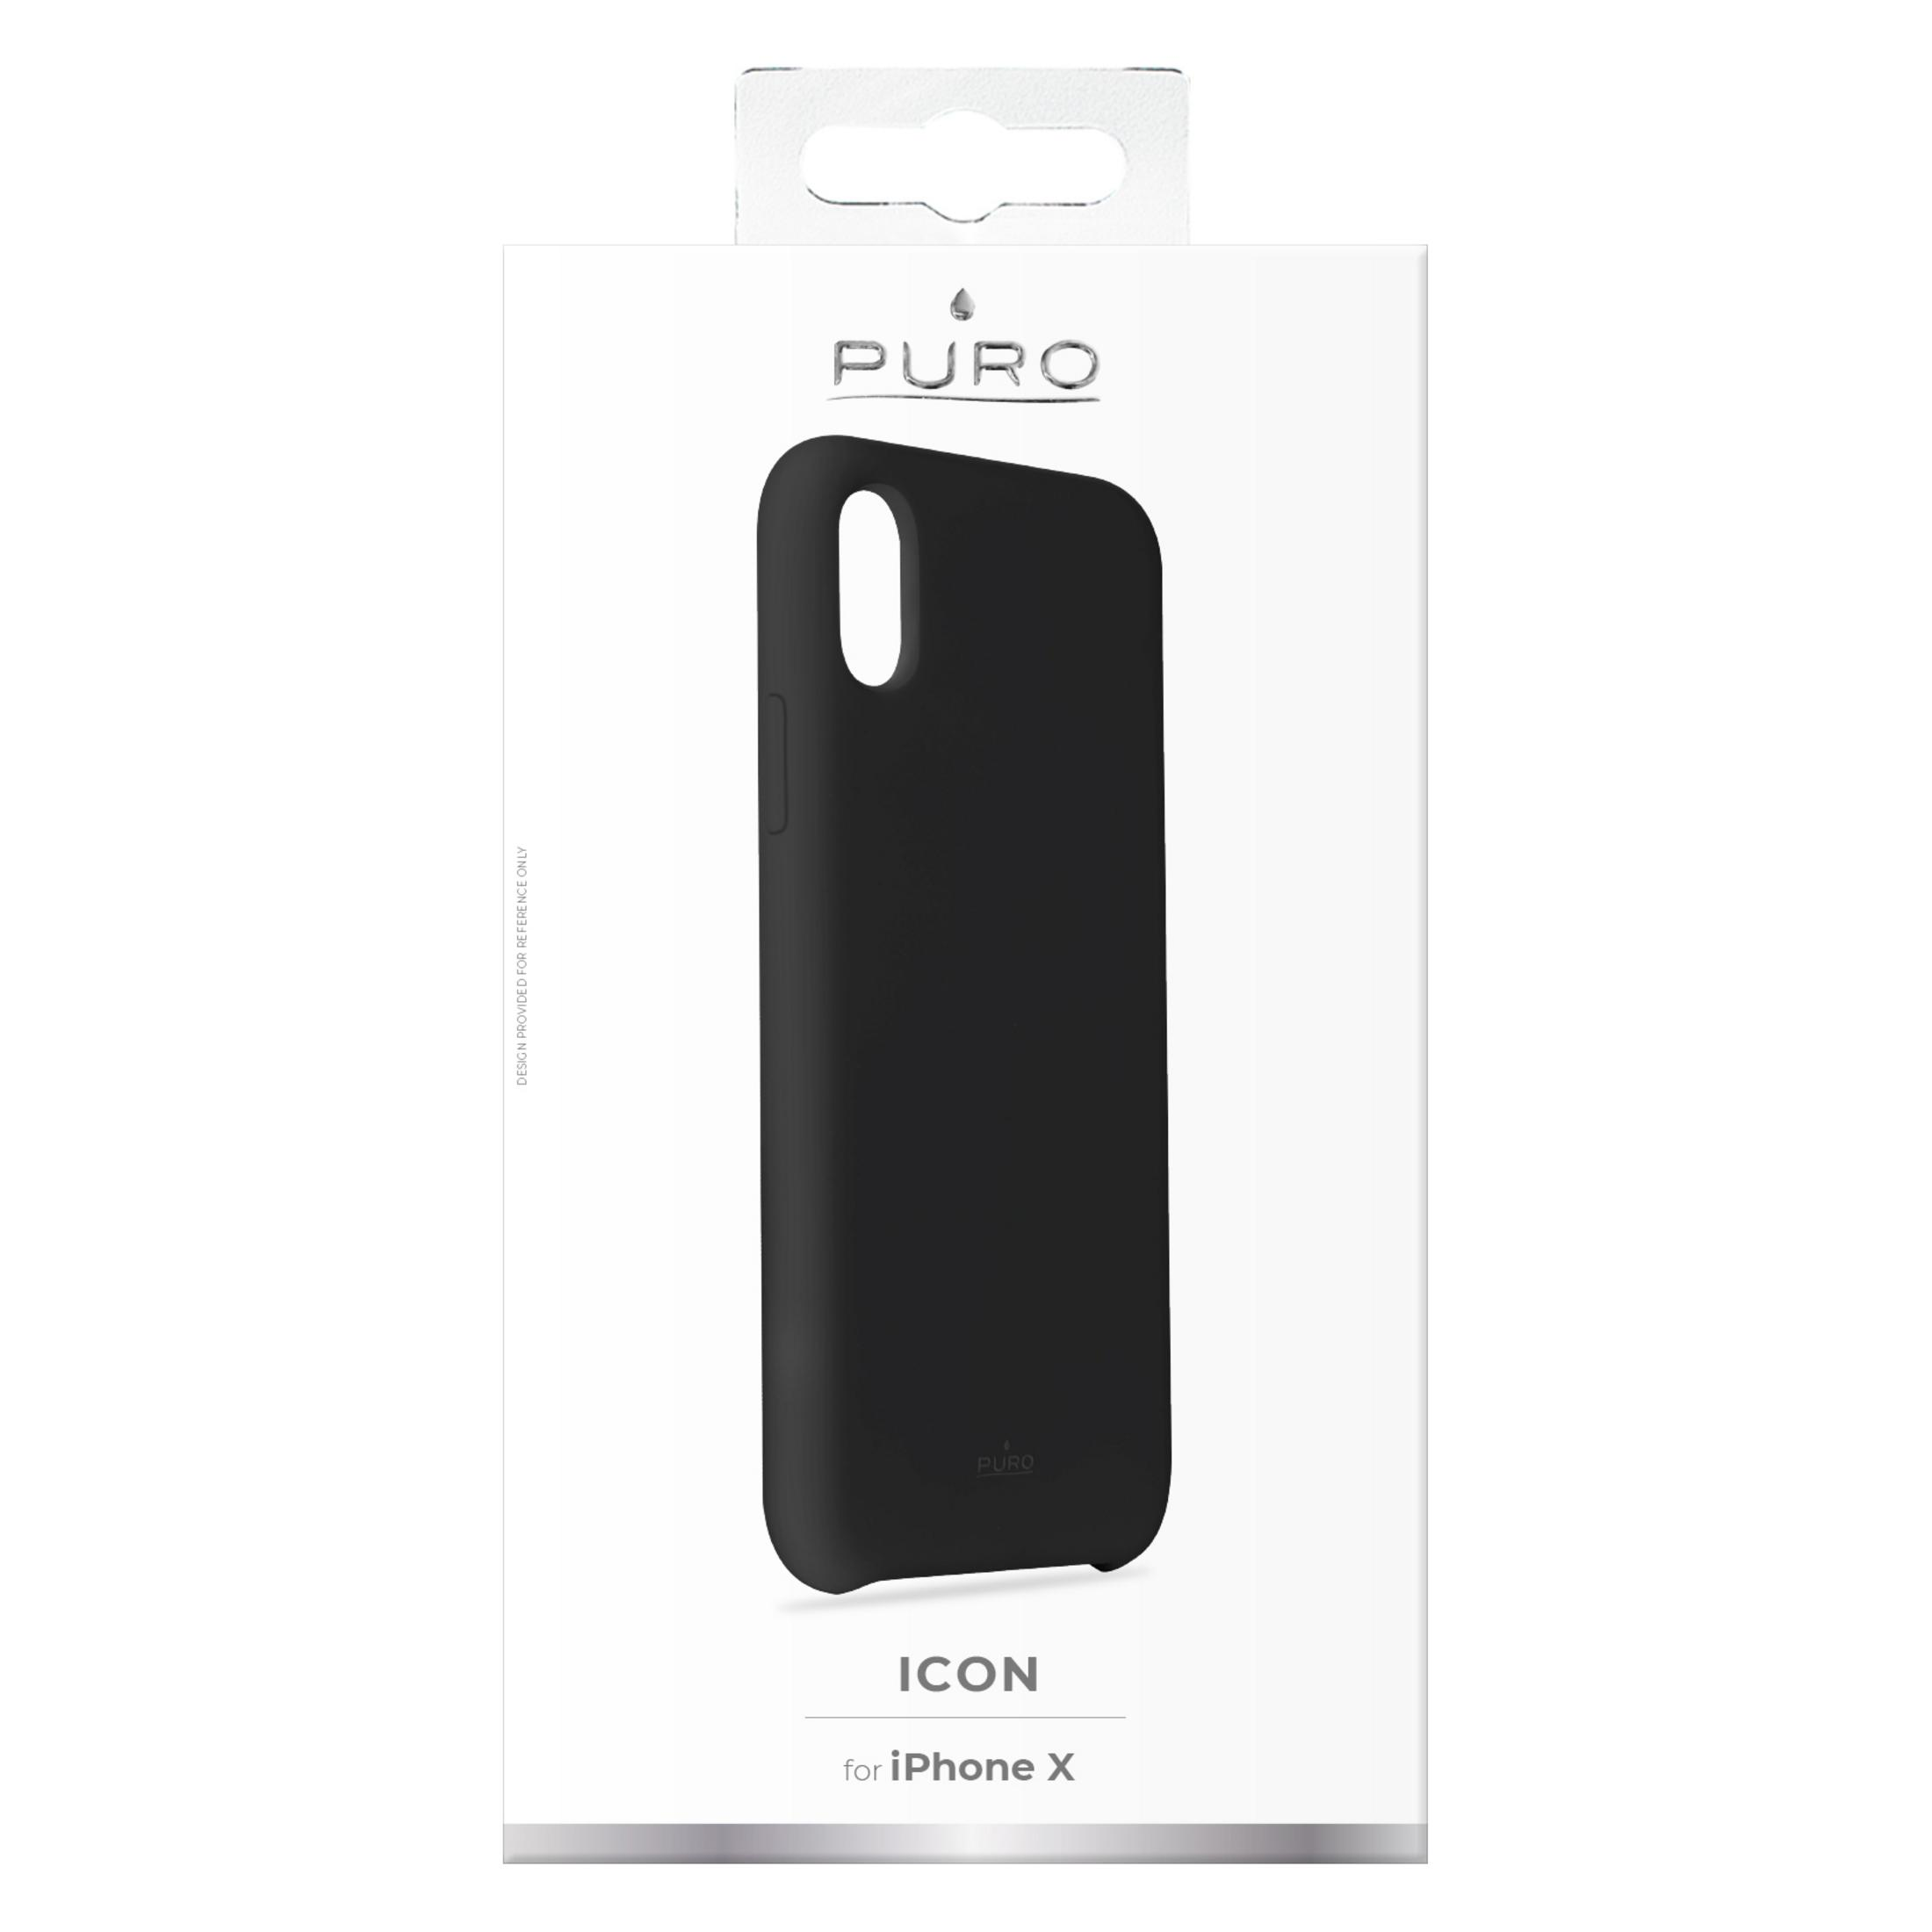 PURO IPCXICONBLK COVER BLACK, iPhone X, Schwarz IPHONE Backcover, SILICON FOR X Apple, 5,8